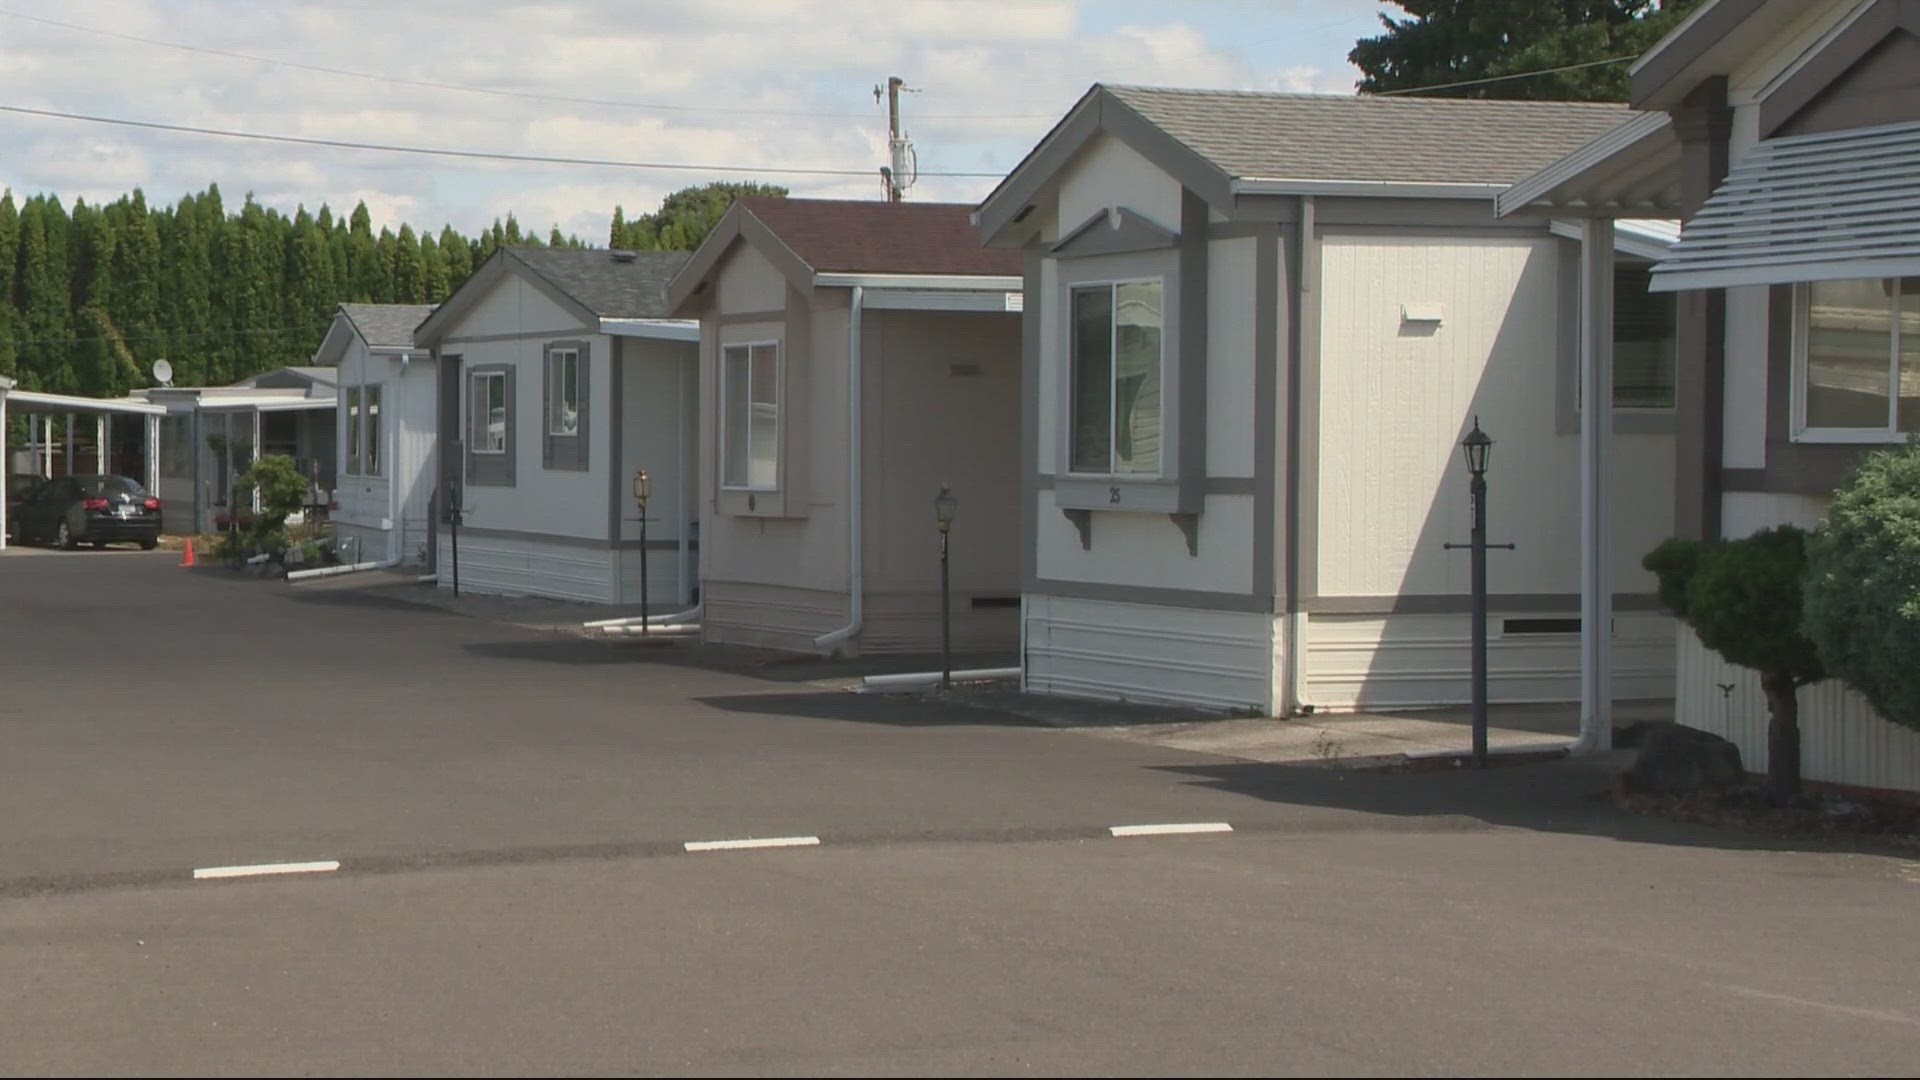 Residents at the Lazy Z mobile home park are people 55 and older on a fixed income. They've reached out to the new owners but haven't heard back from them.